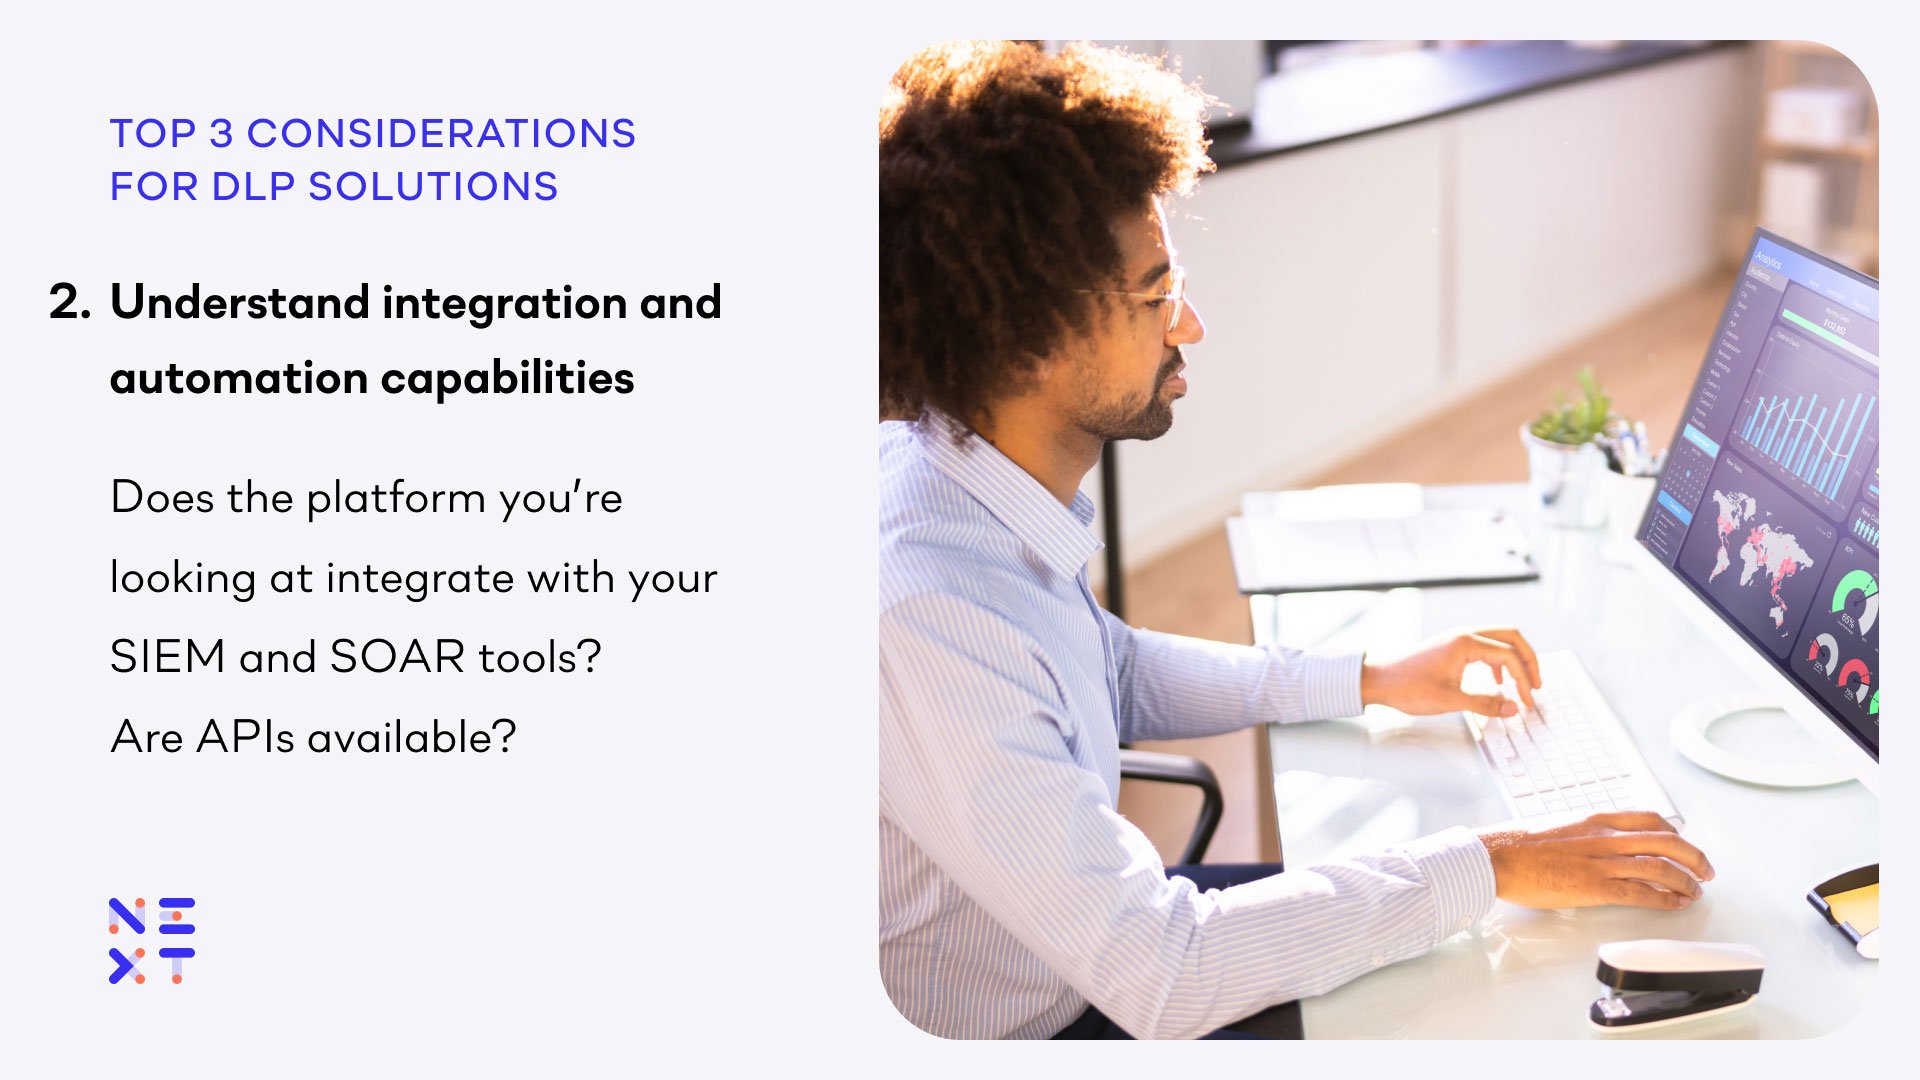 Top considerations for DLP solutions - 2: Understand integration and automation capabilities